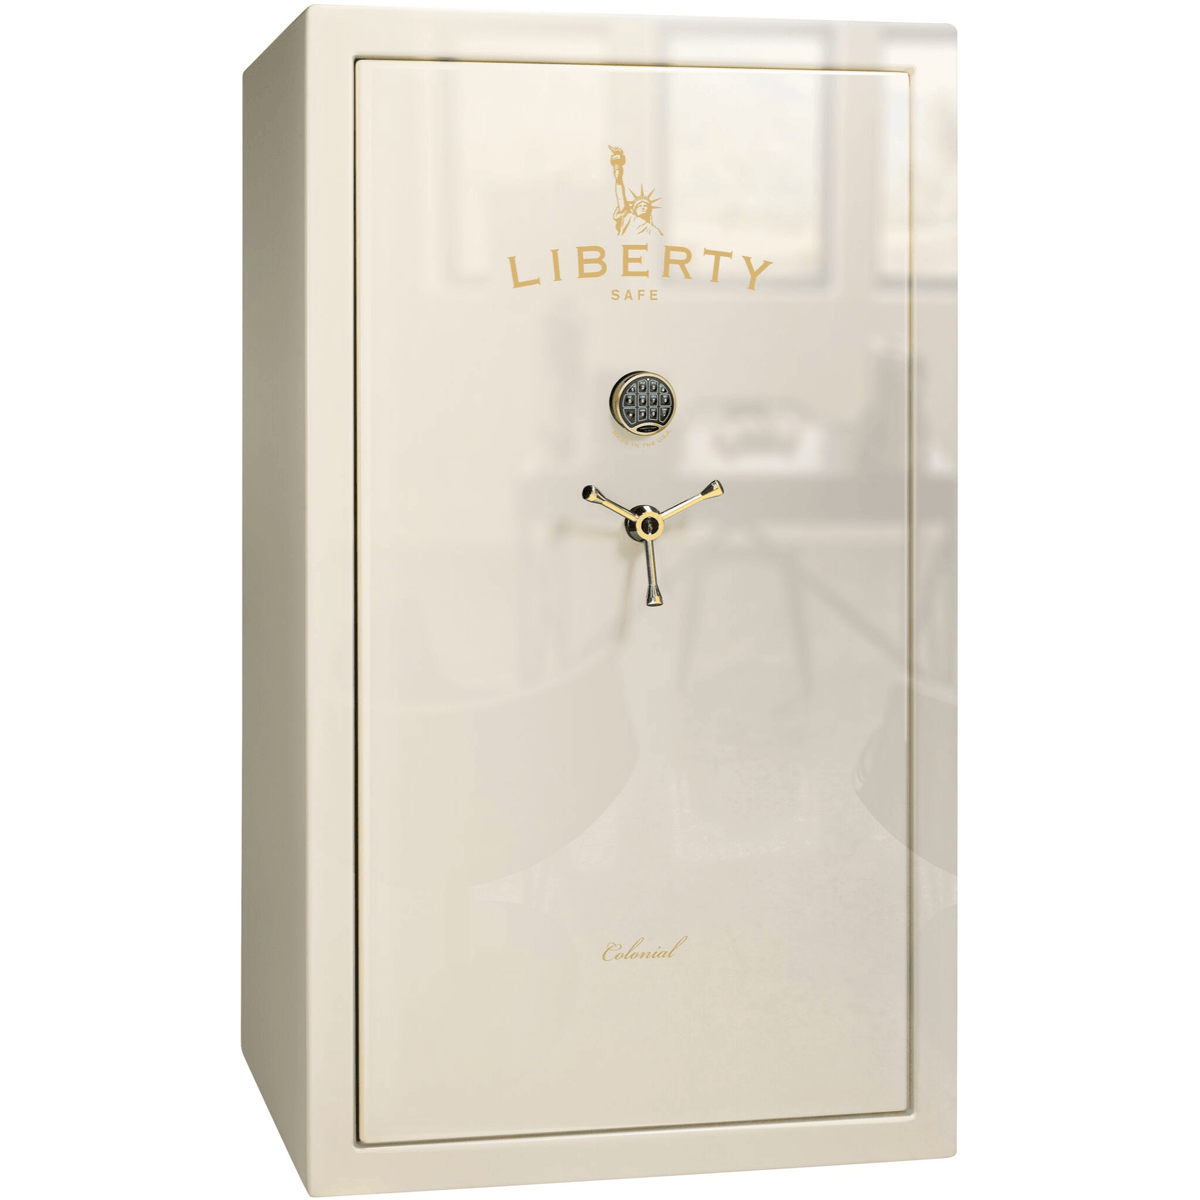 Liberty Colonial 50 Safe in White Gloss with Brass Electronic Lock.